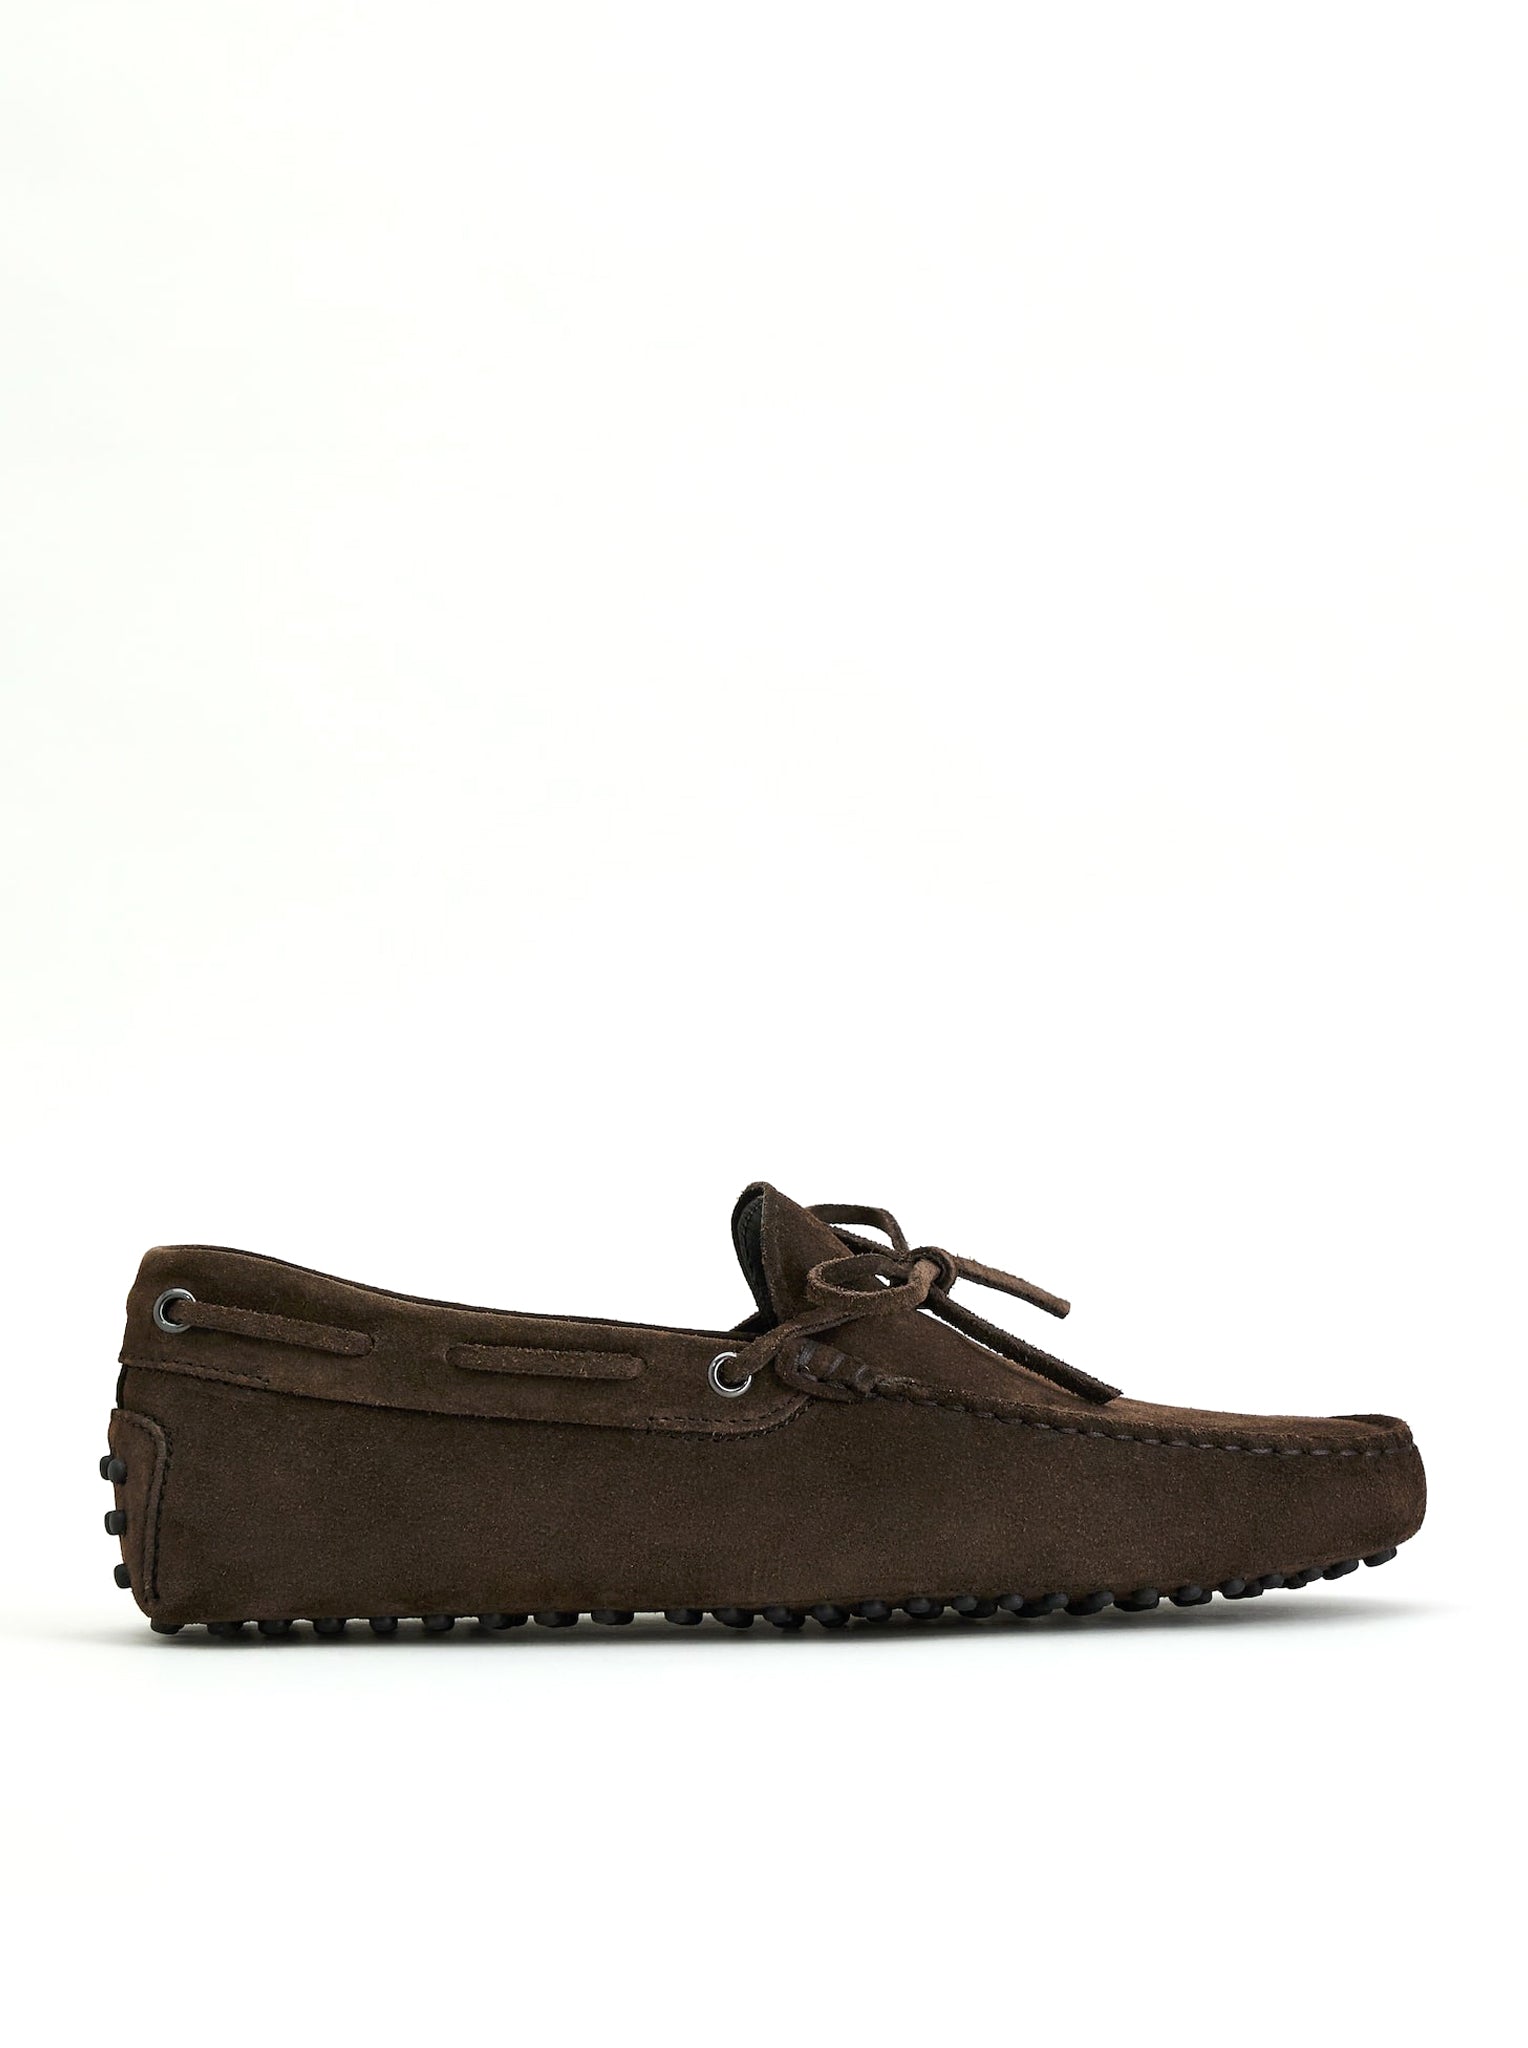 Gommino Moccasin in Suede Leather